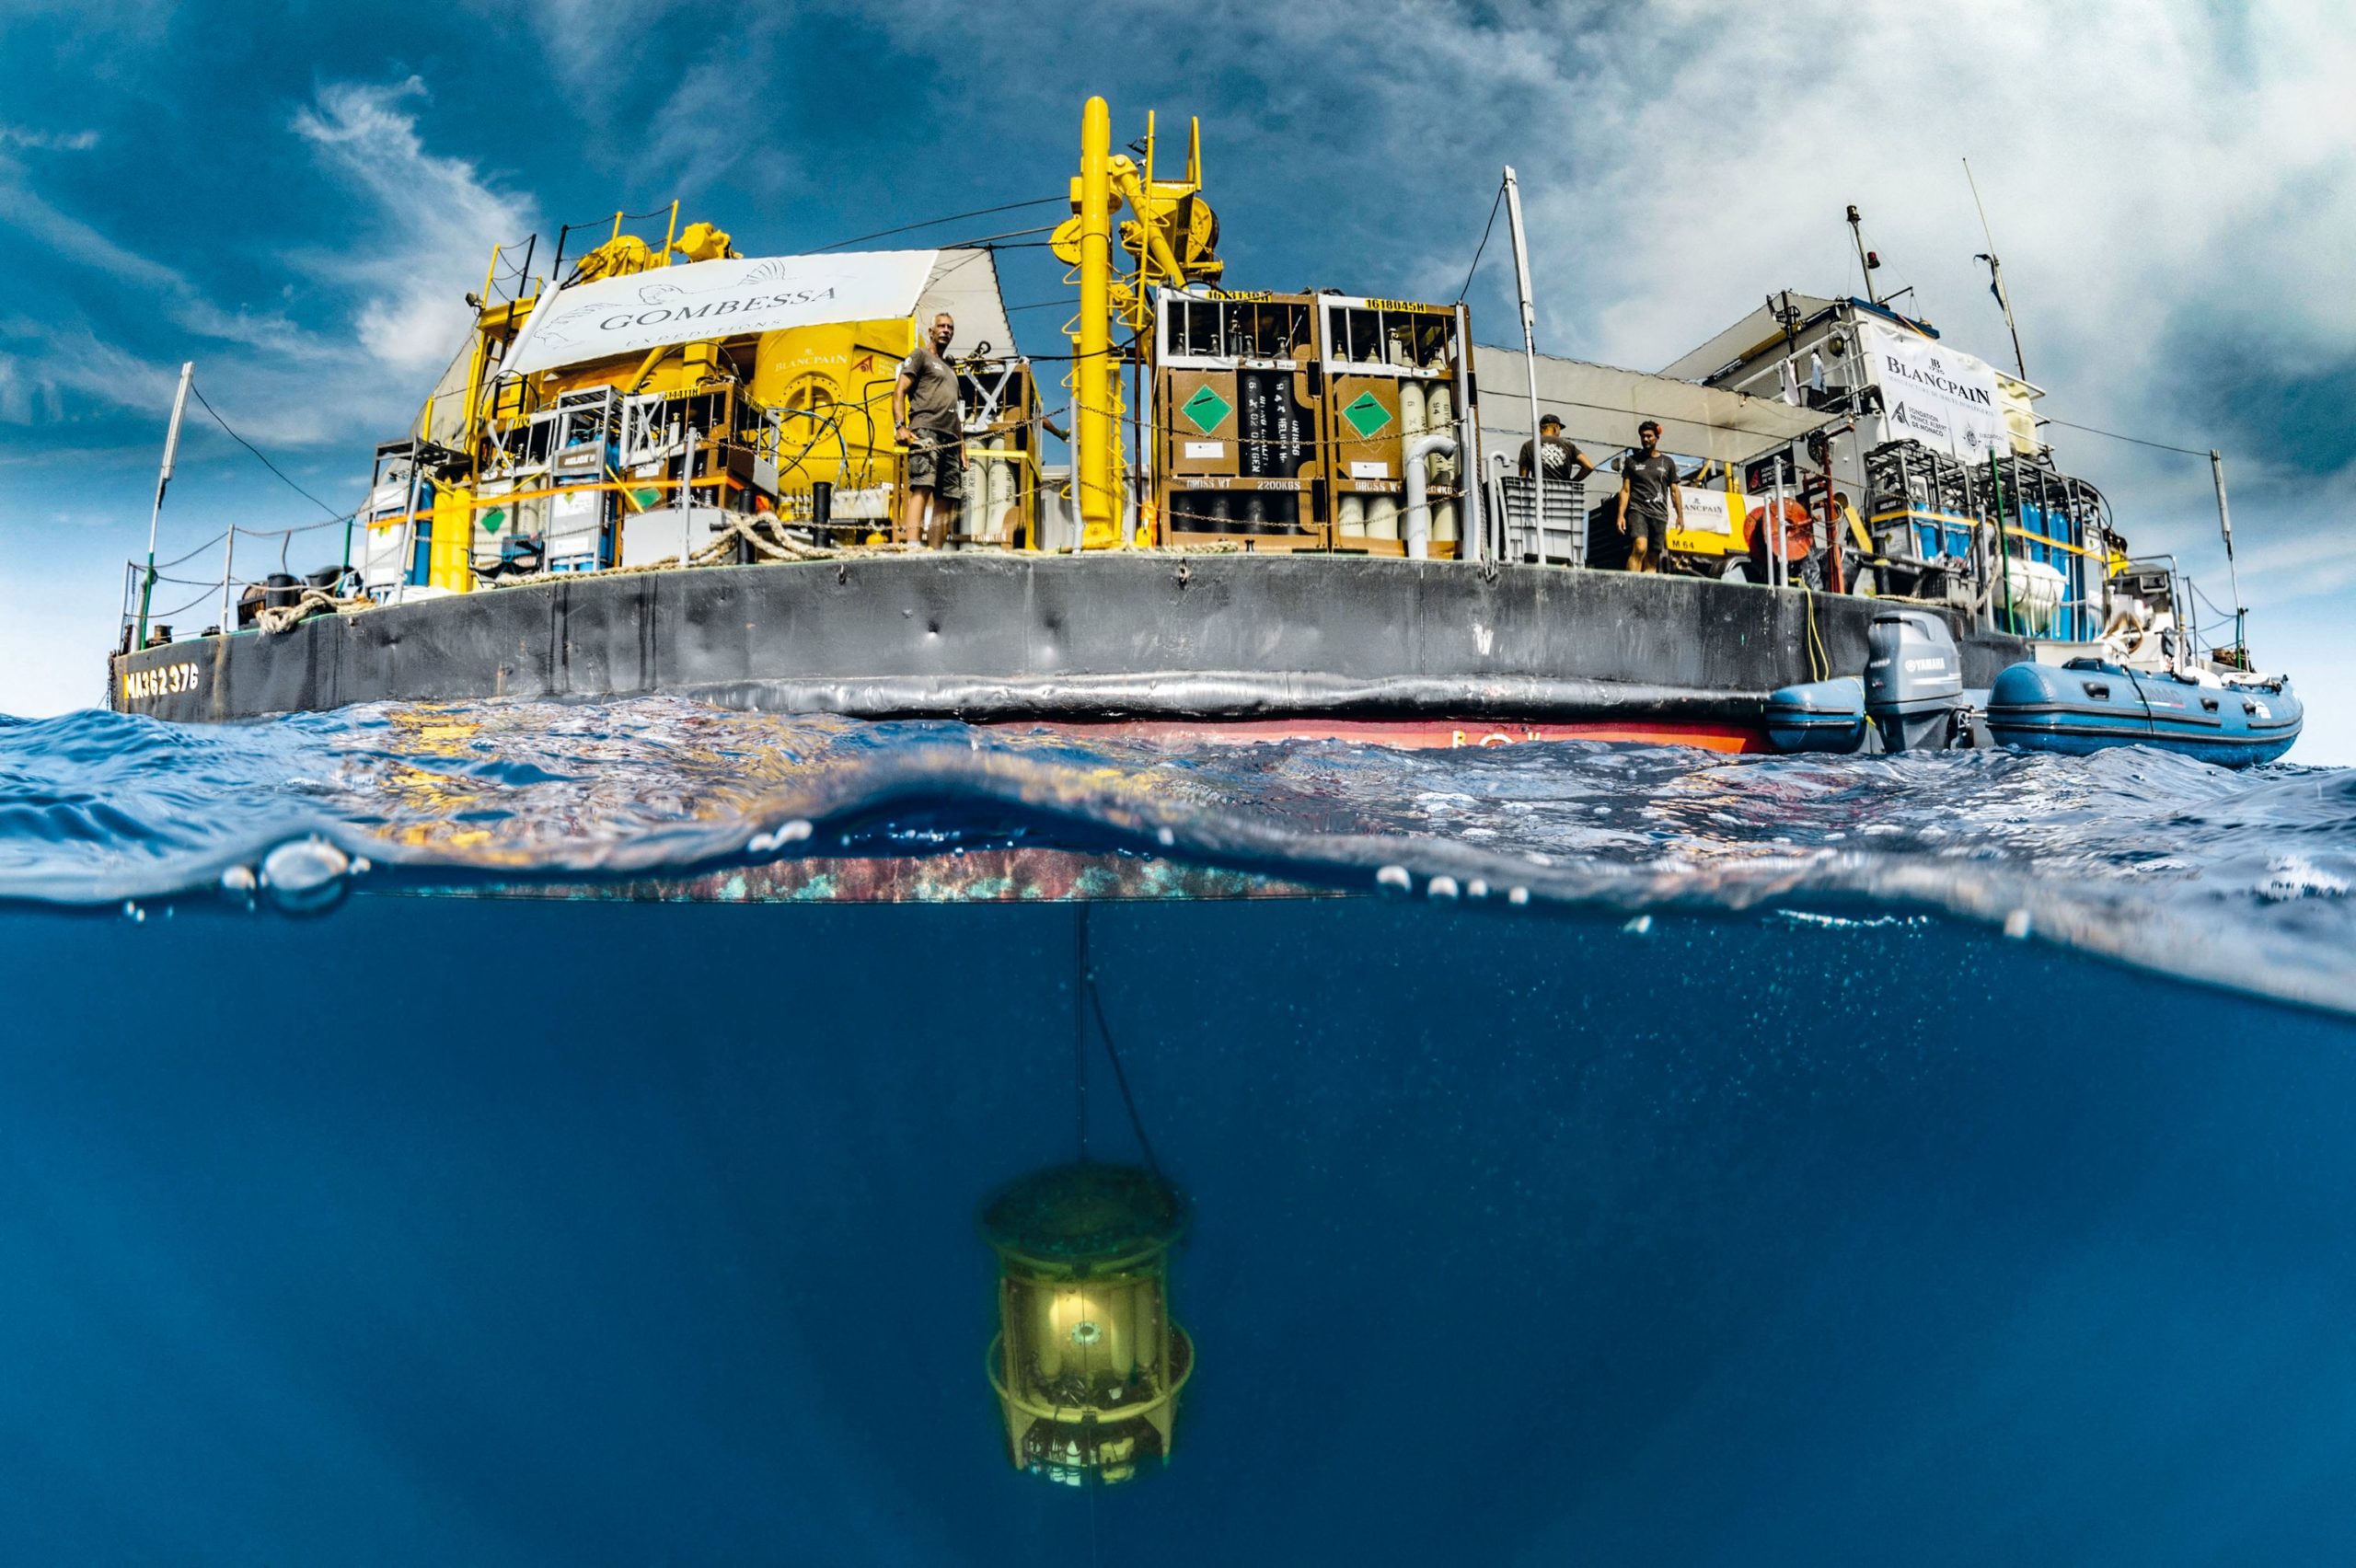 Marlink provides seamless connectivity for scientific research vessel to study ocean environment at risk